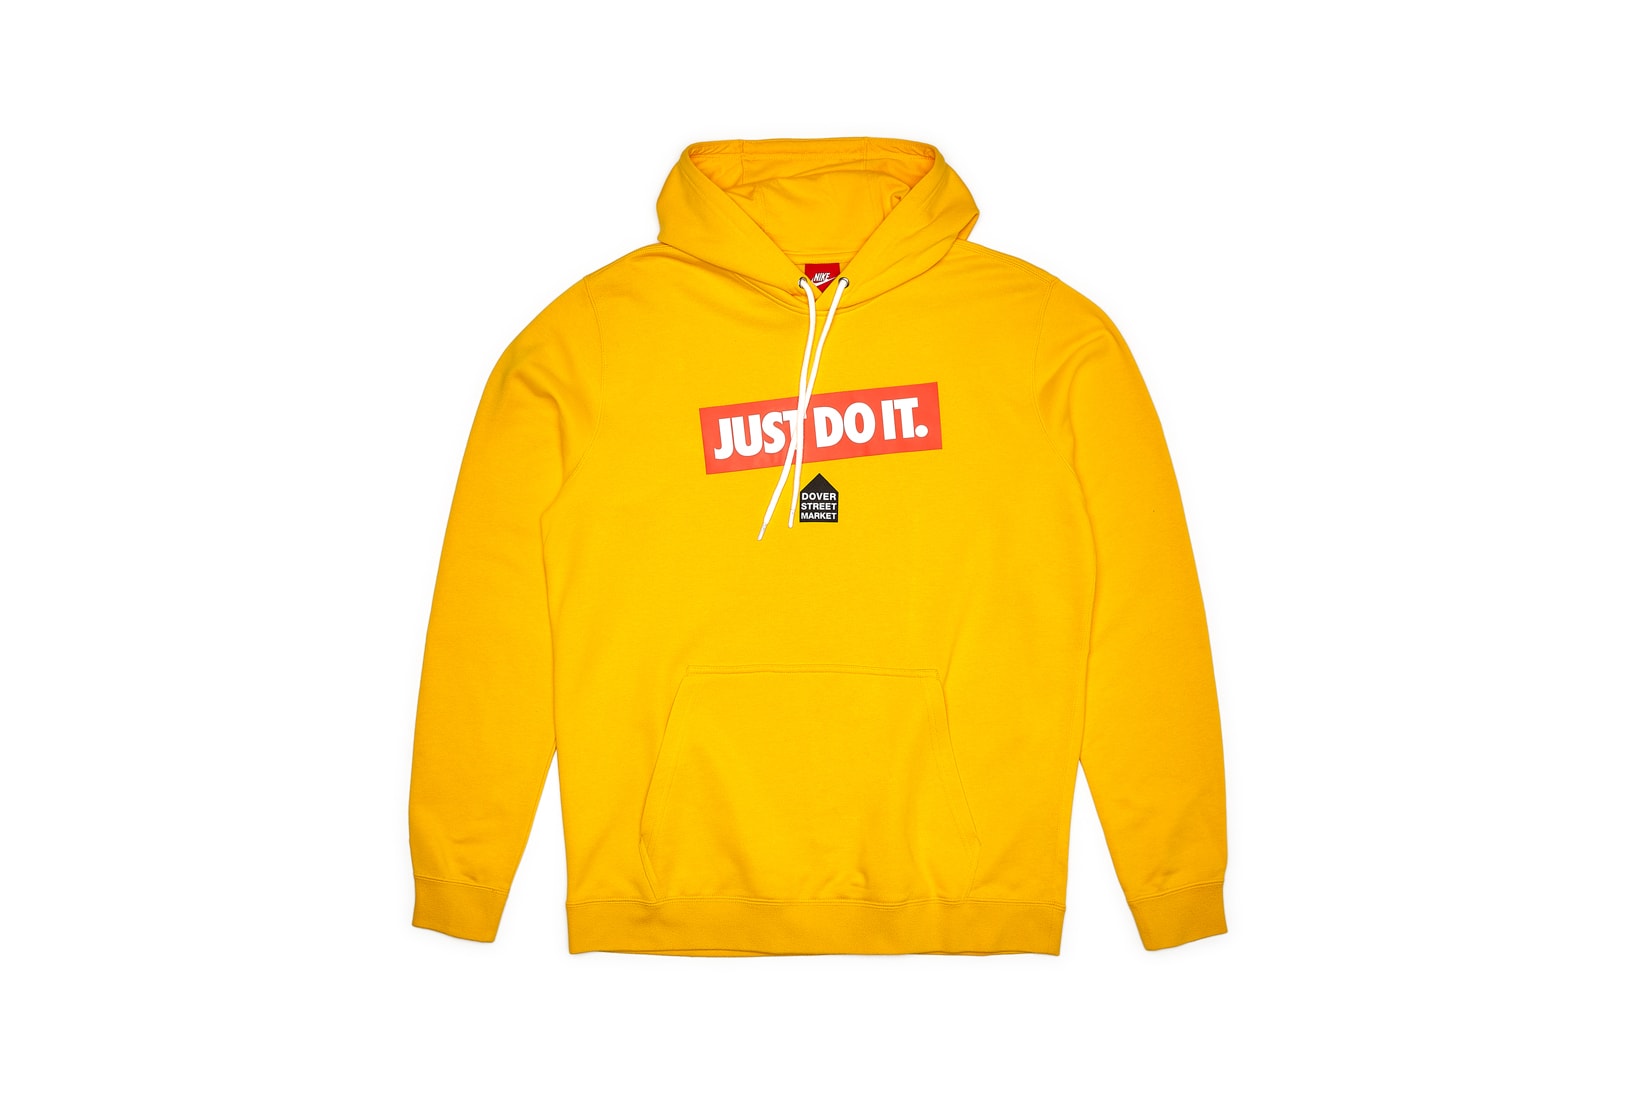 Nike x Dover Street Market Just Do It Hoodie Yellow